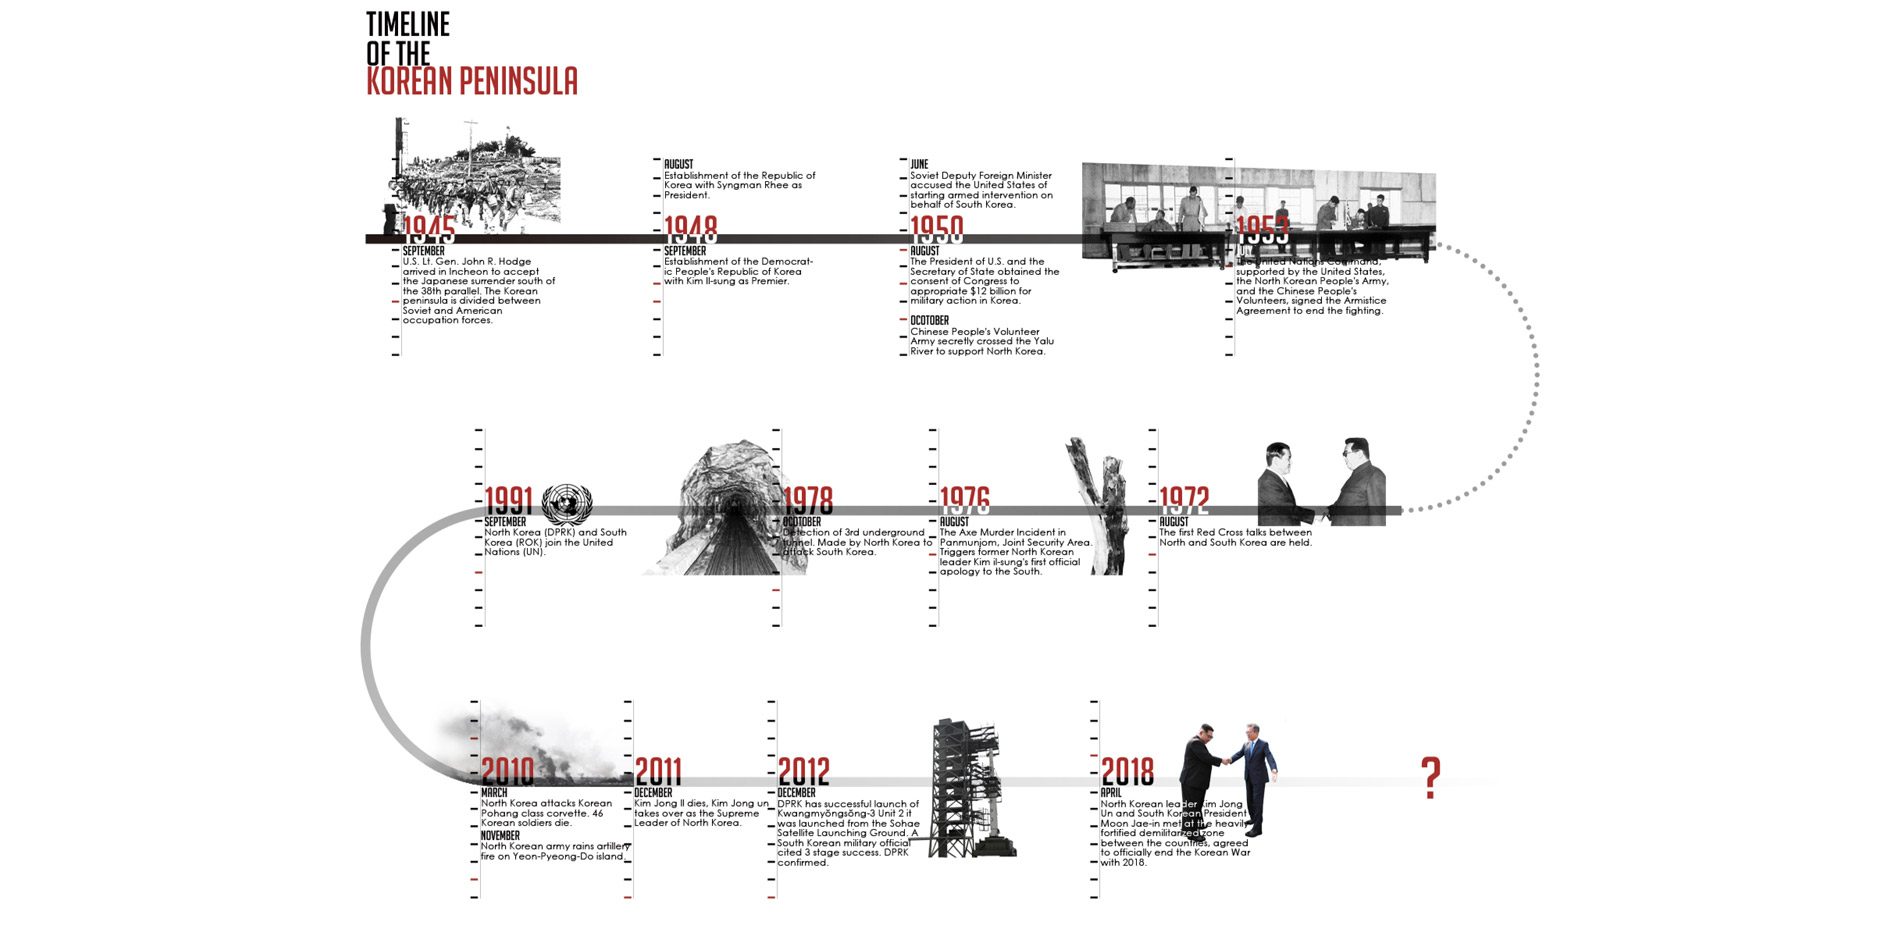 Event timeline following the Korean War (1953 onwards). North Korea and South Korea working together towards Re-Unification. Leaders from both countri…